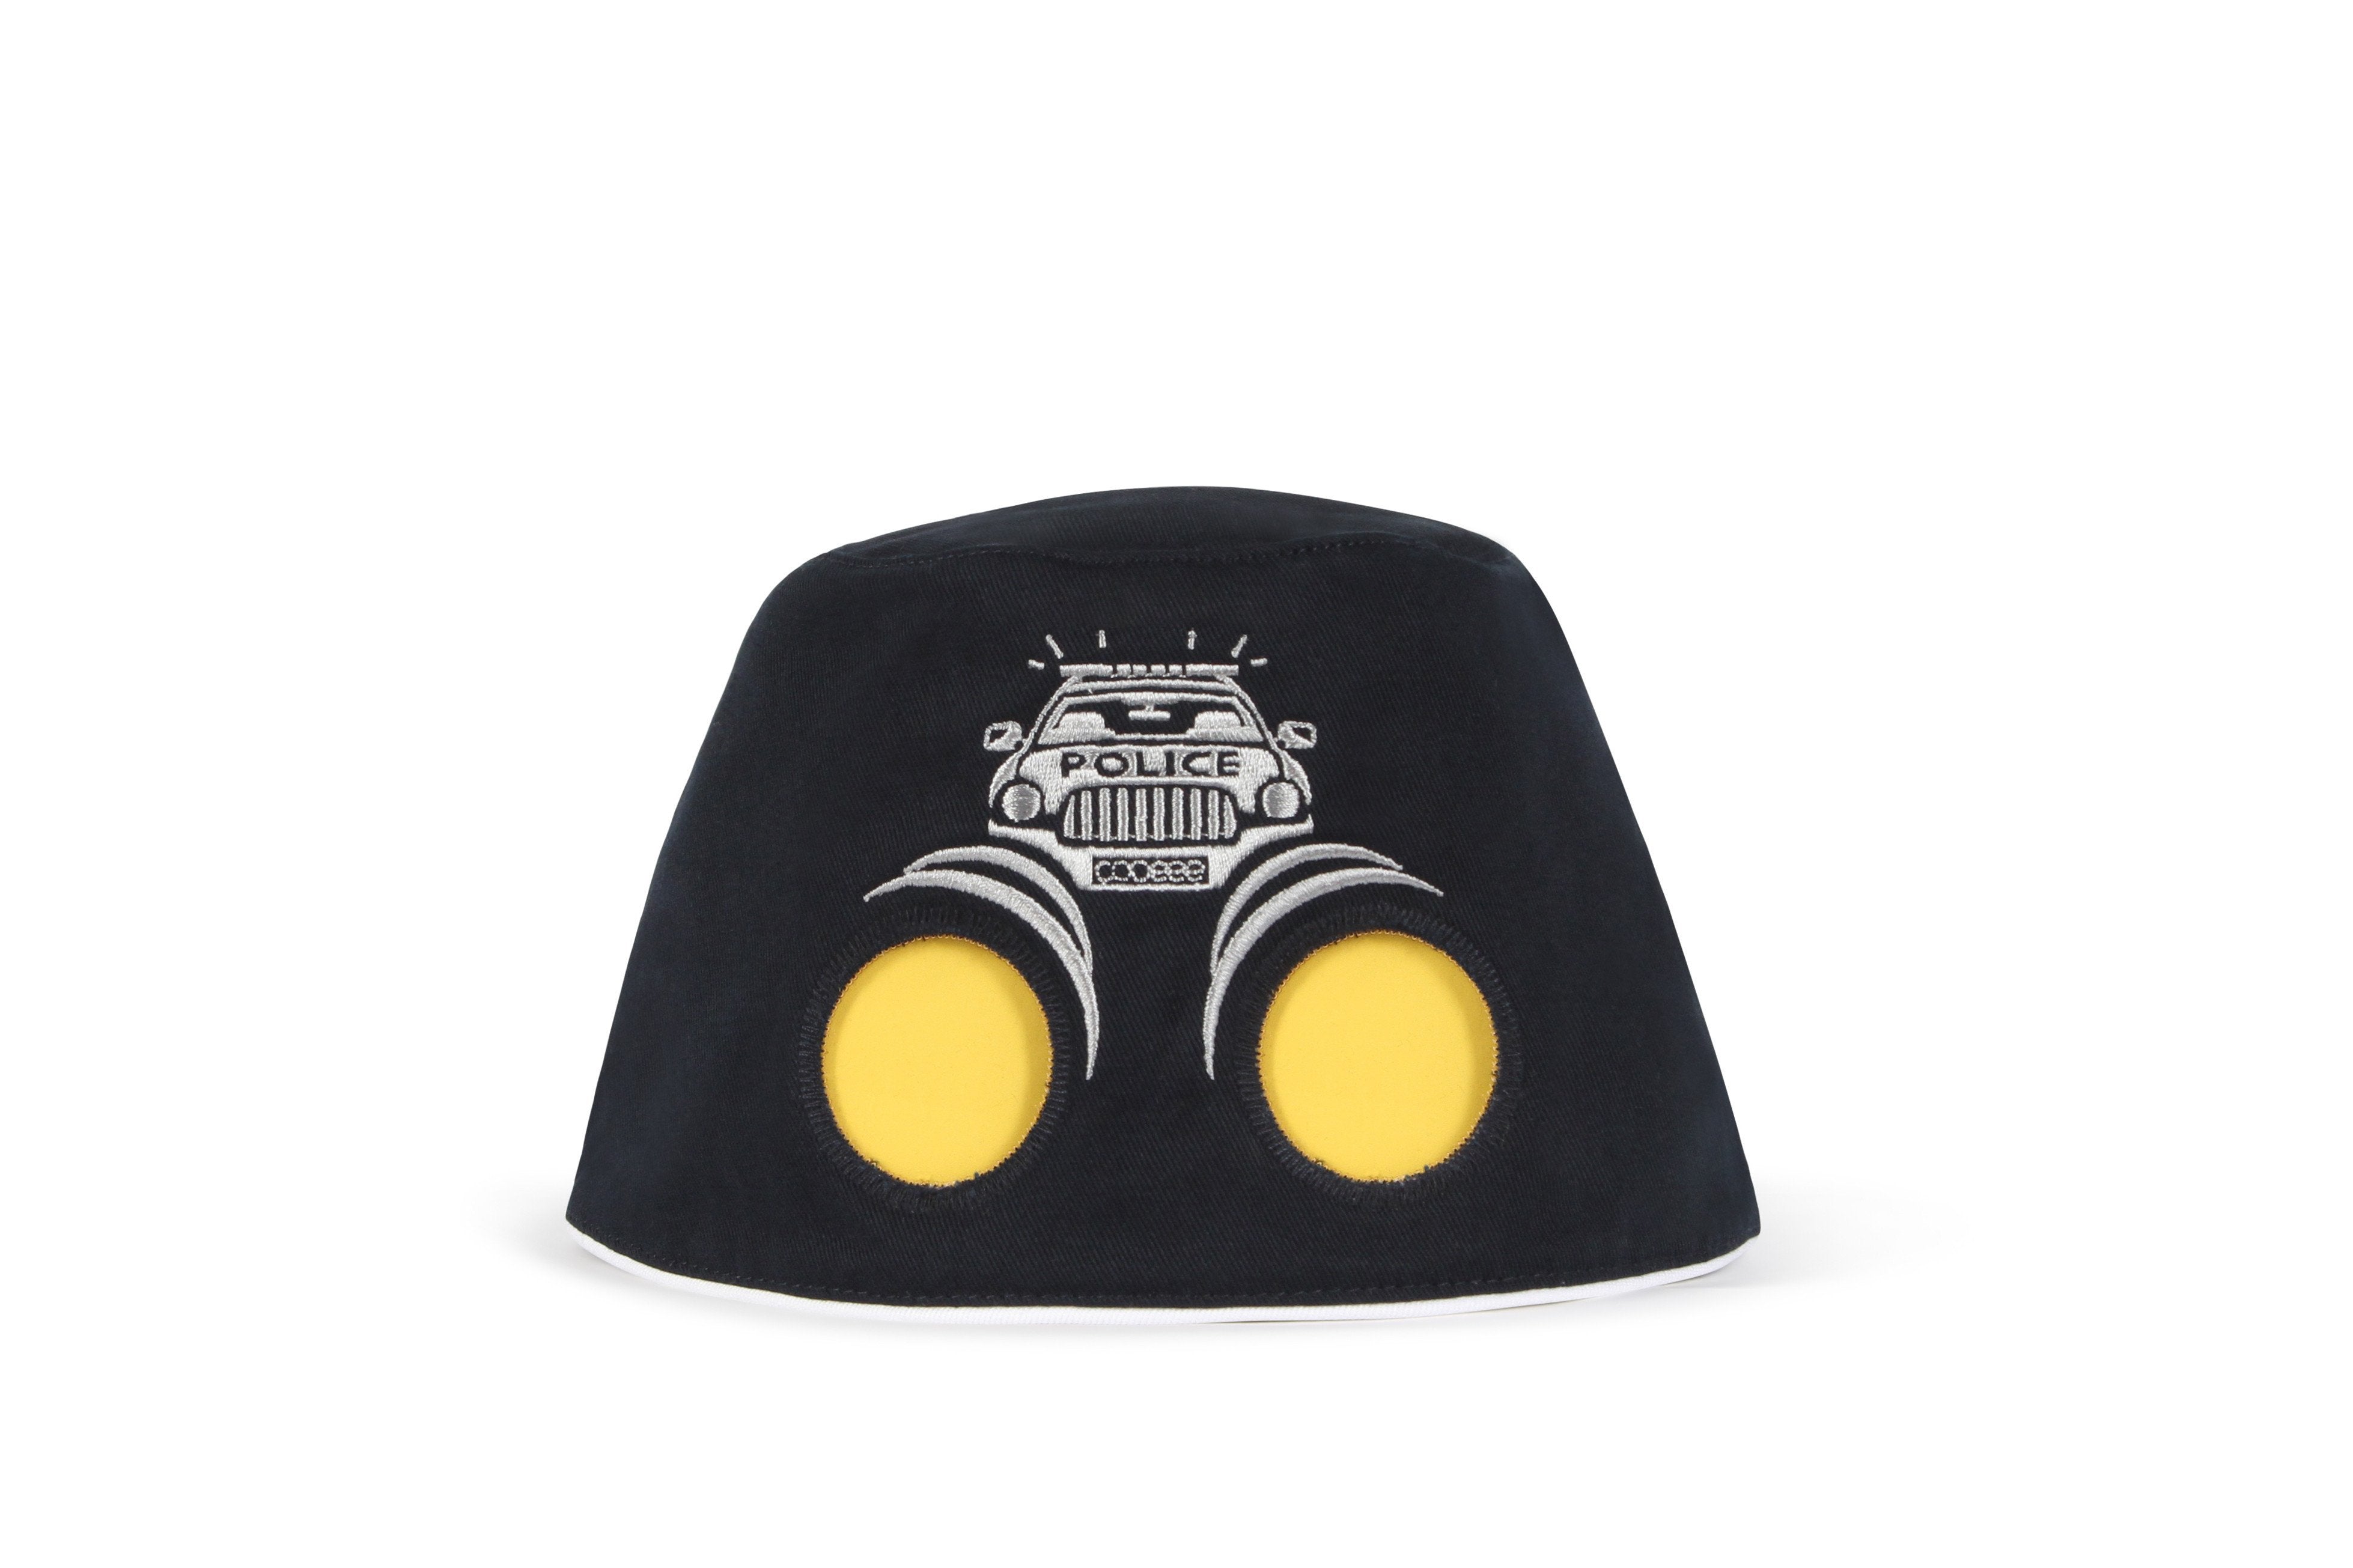 COOEEE Police Car Sunglasses Hat Black with Yellow Lenses by Boomerang Baby